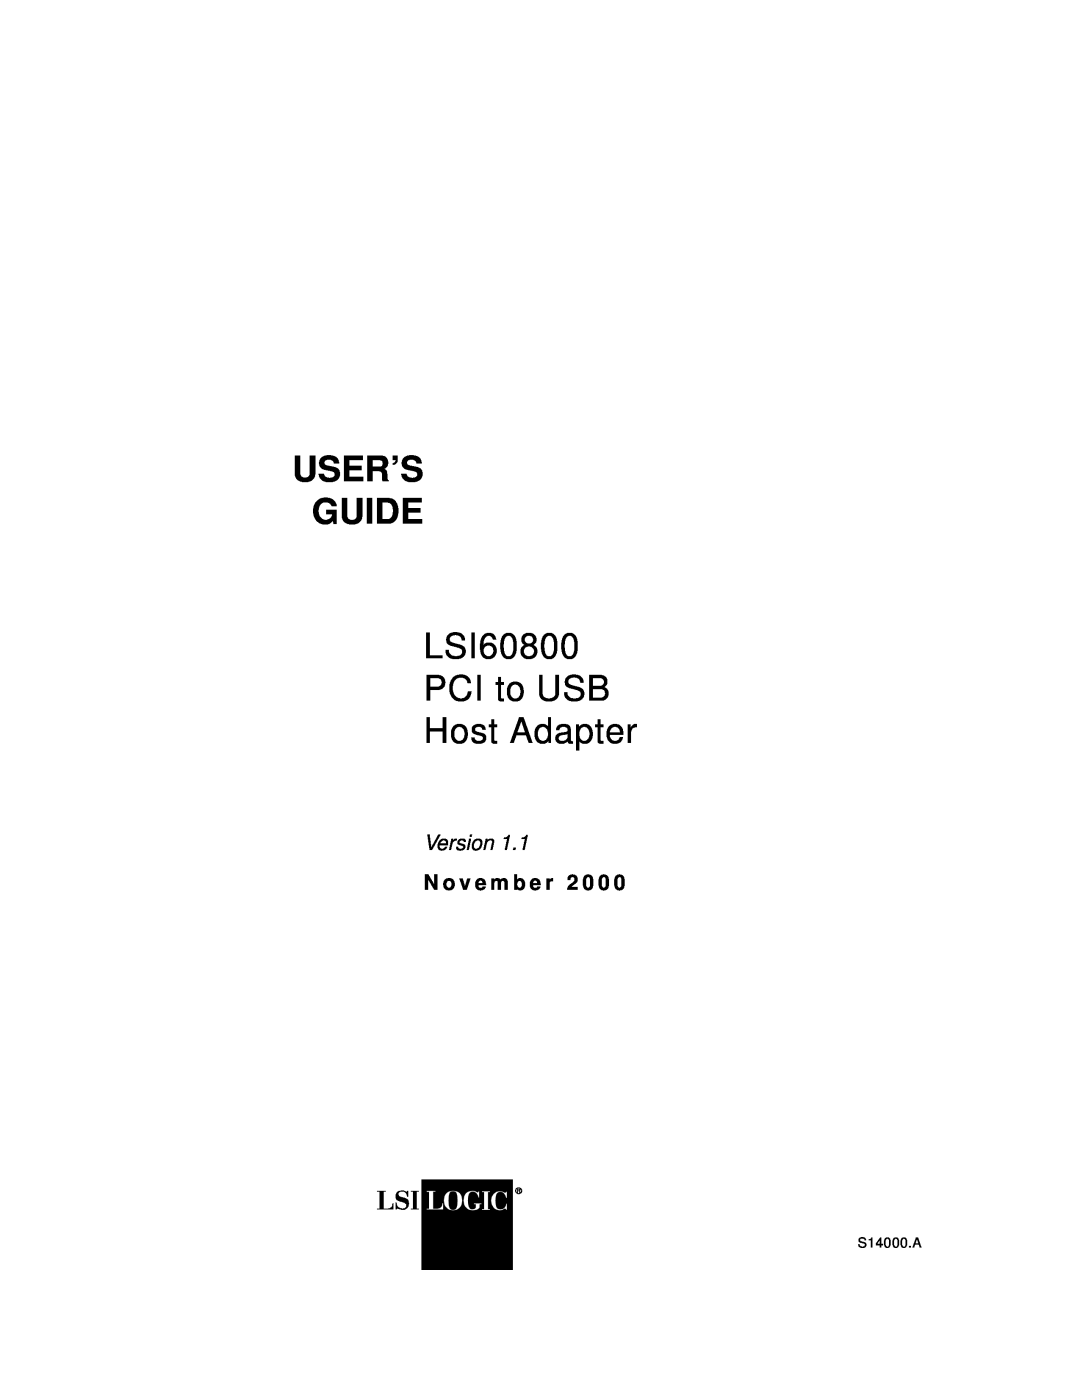 LSI manual N o v e m b e r 2 0 0, User’S Guide, LSI60800 PCI to USB Host Adapter, Version 